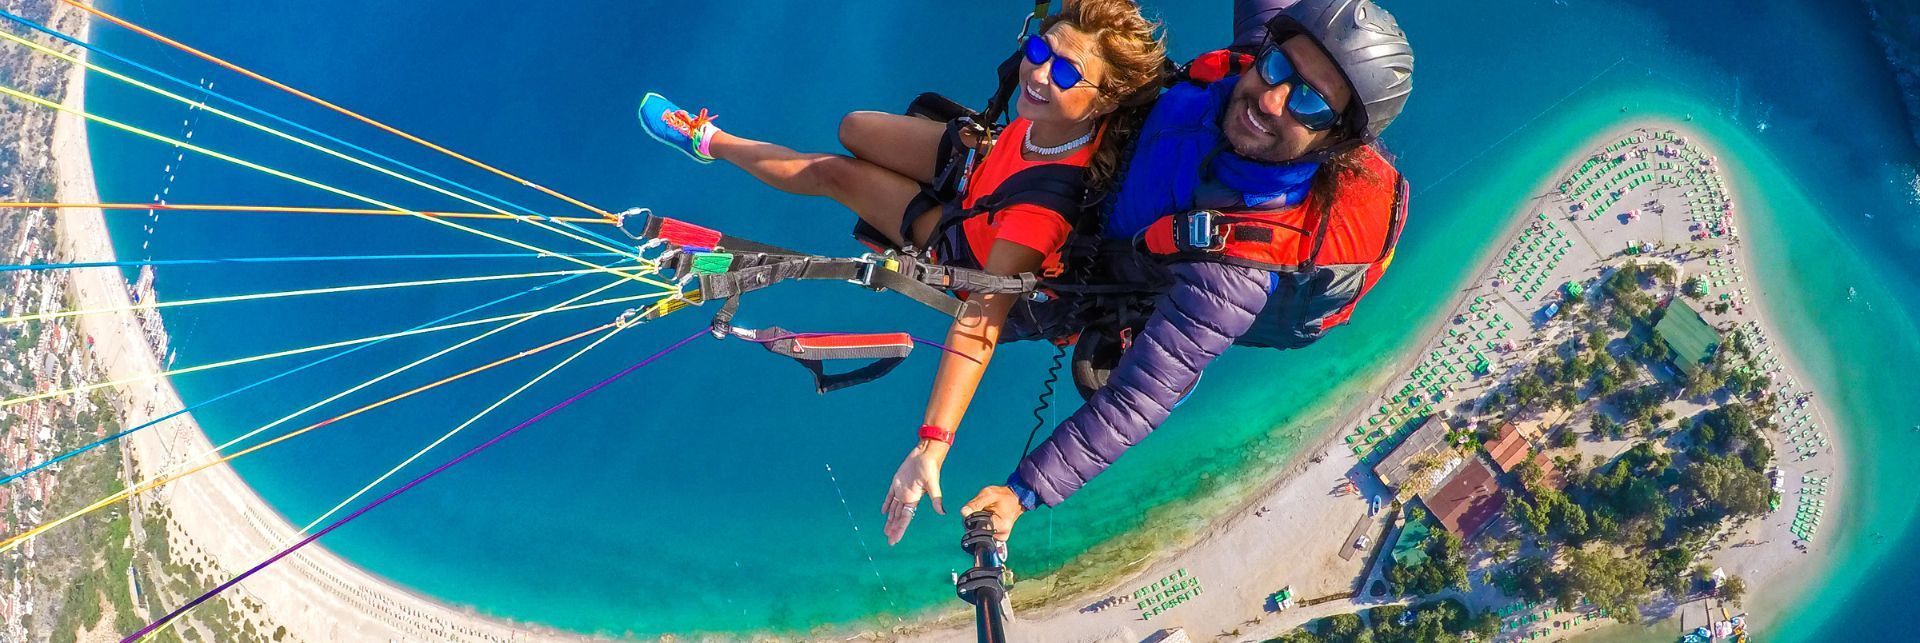 A man and a woman are parasailing over a body of water.